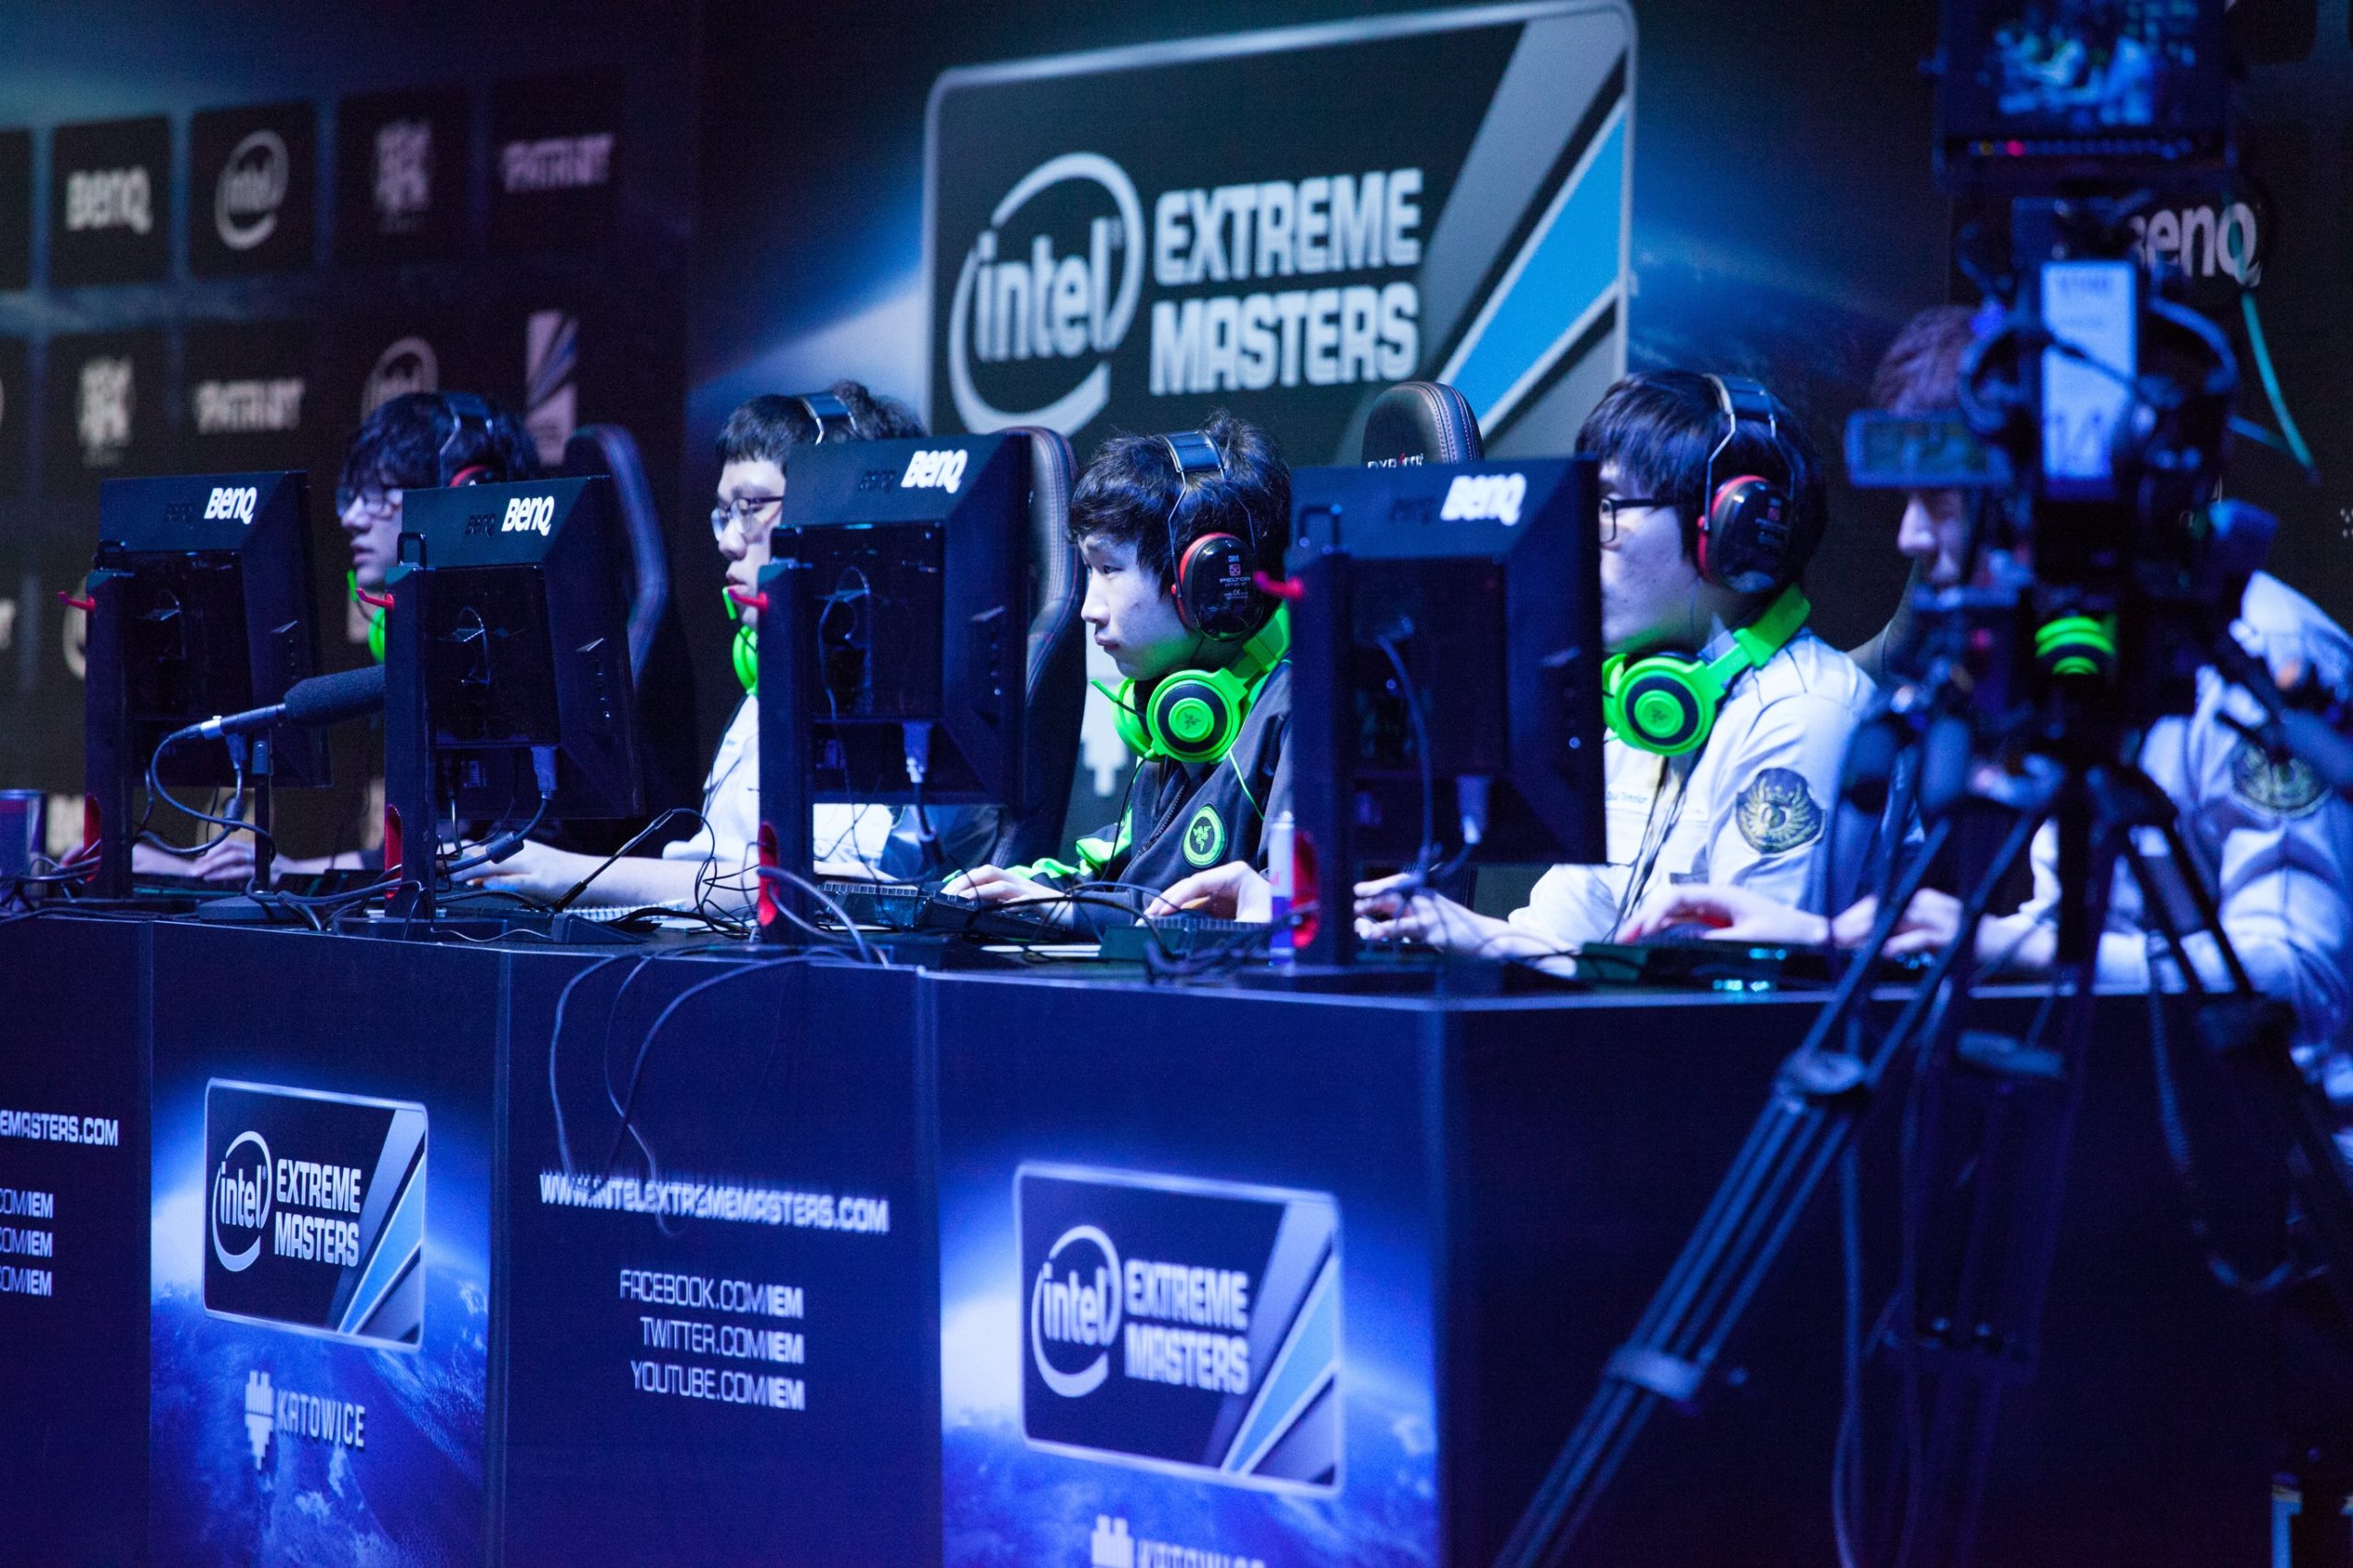 Intel Extreme Masters shows growth of e-sports scene